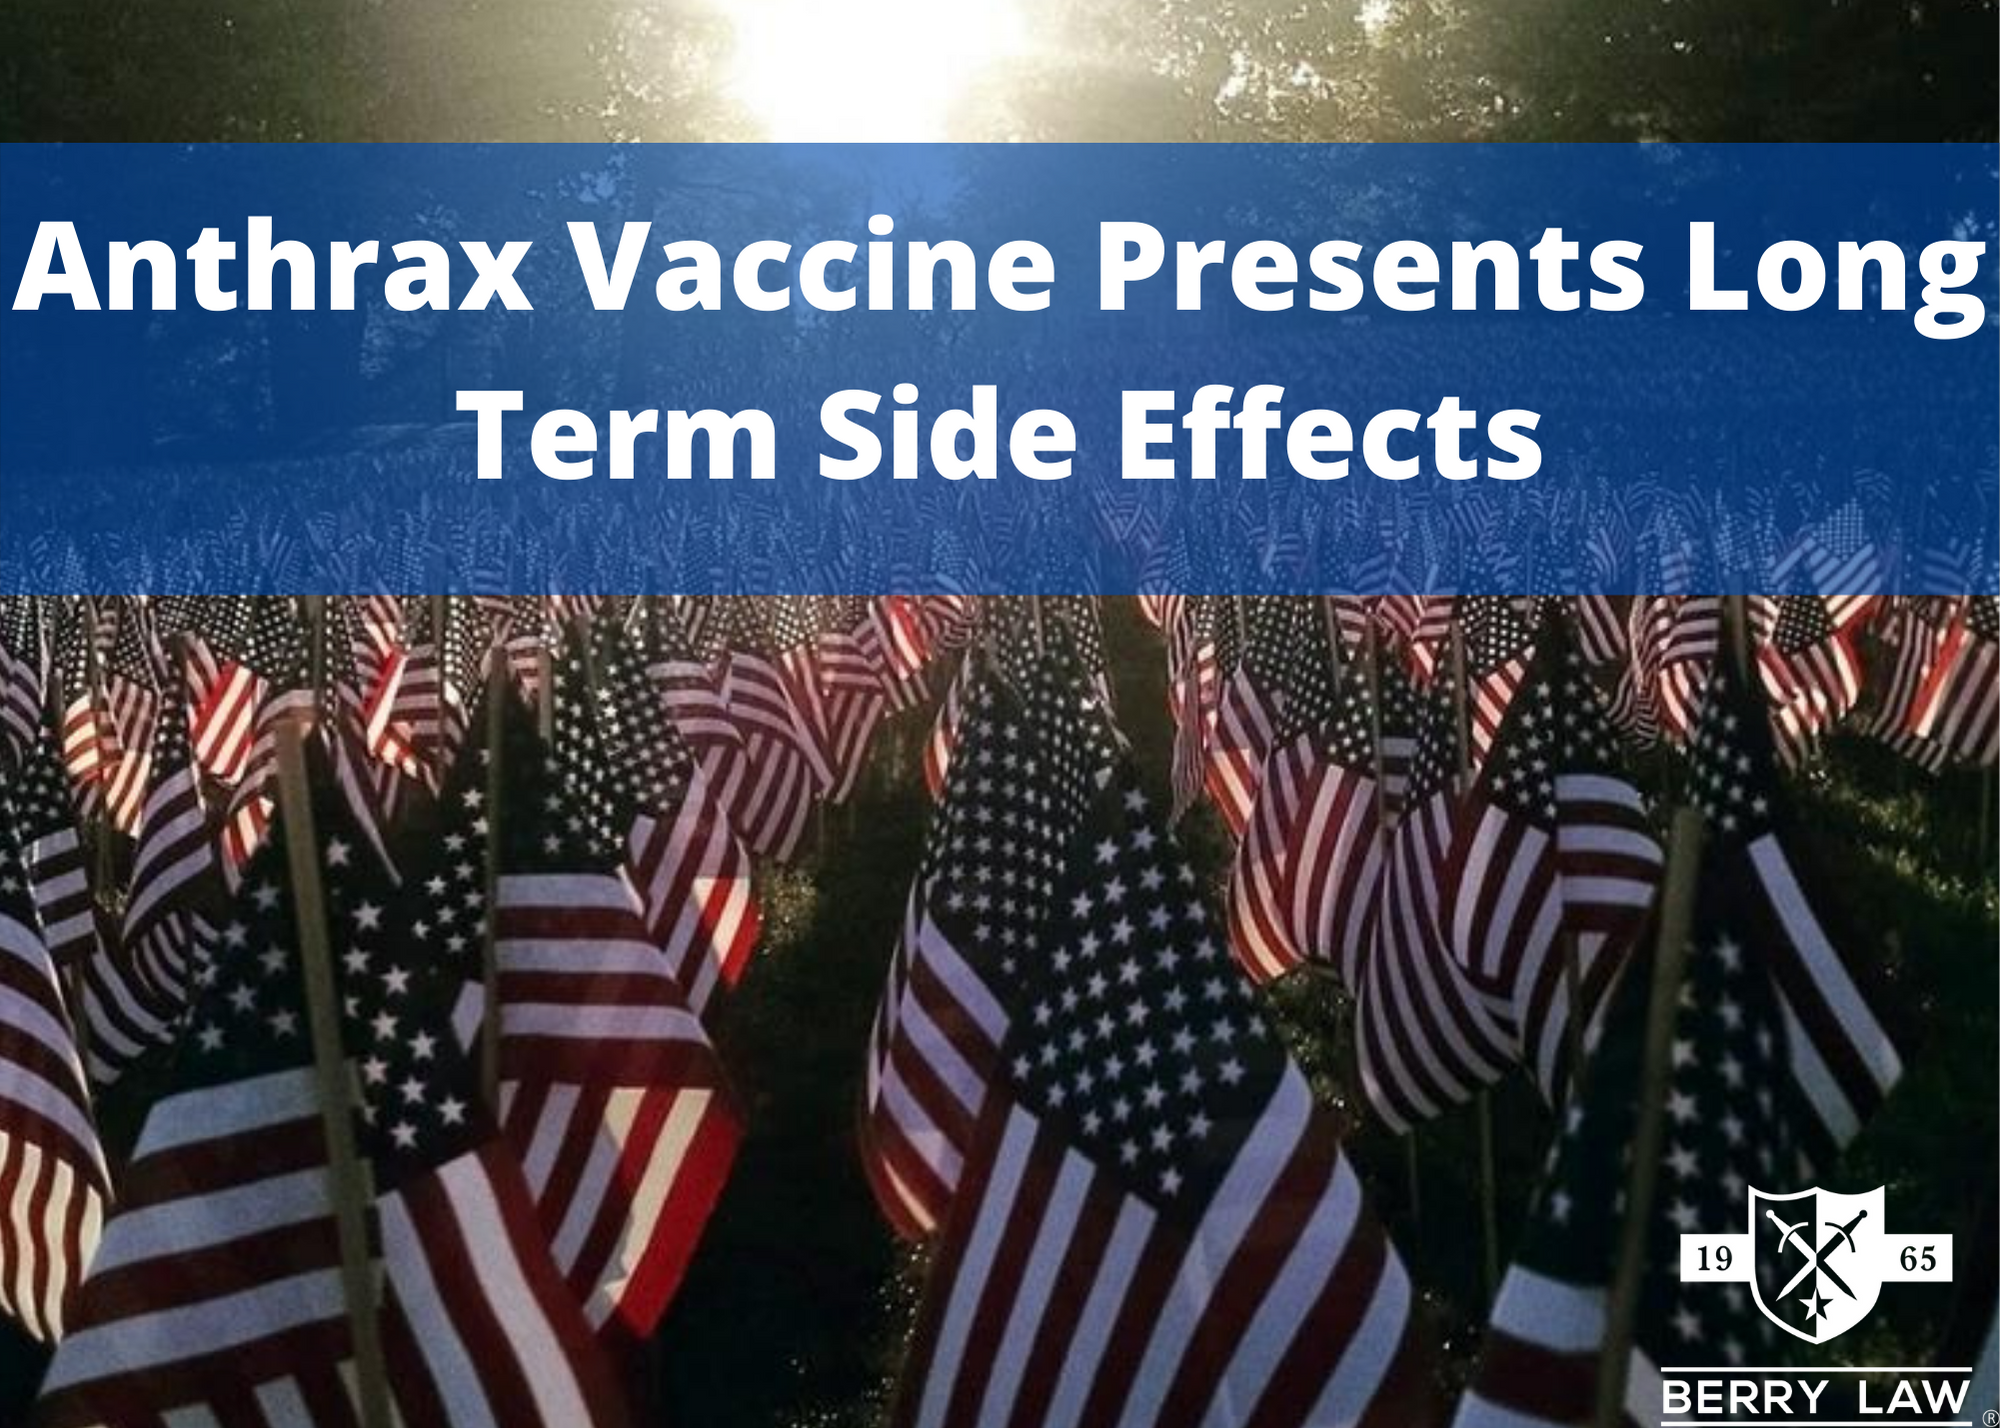 Anthrax Vaccine Presents Long Term Side Effects